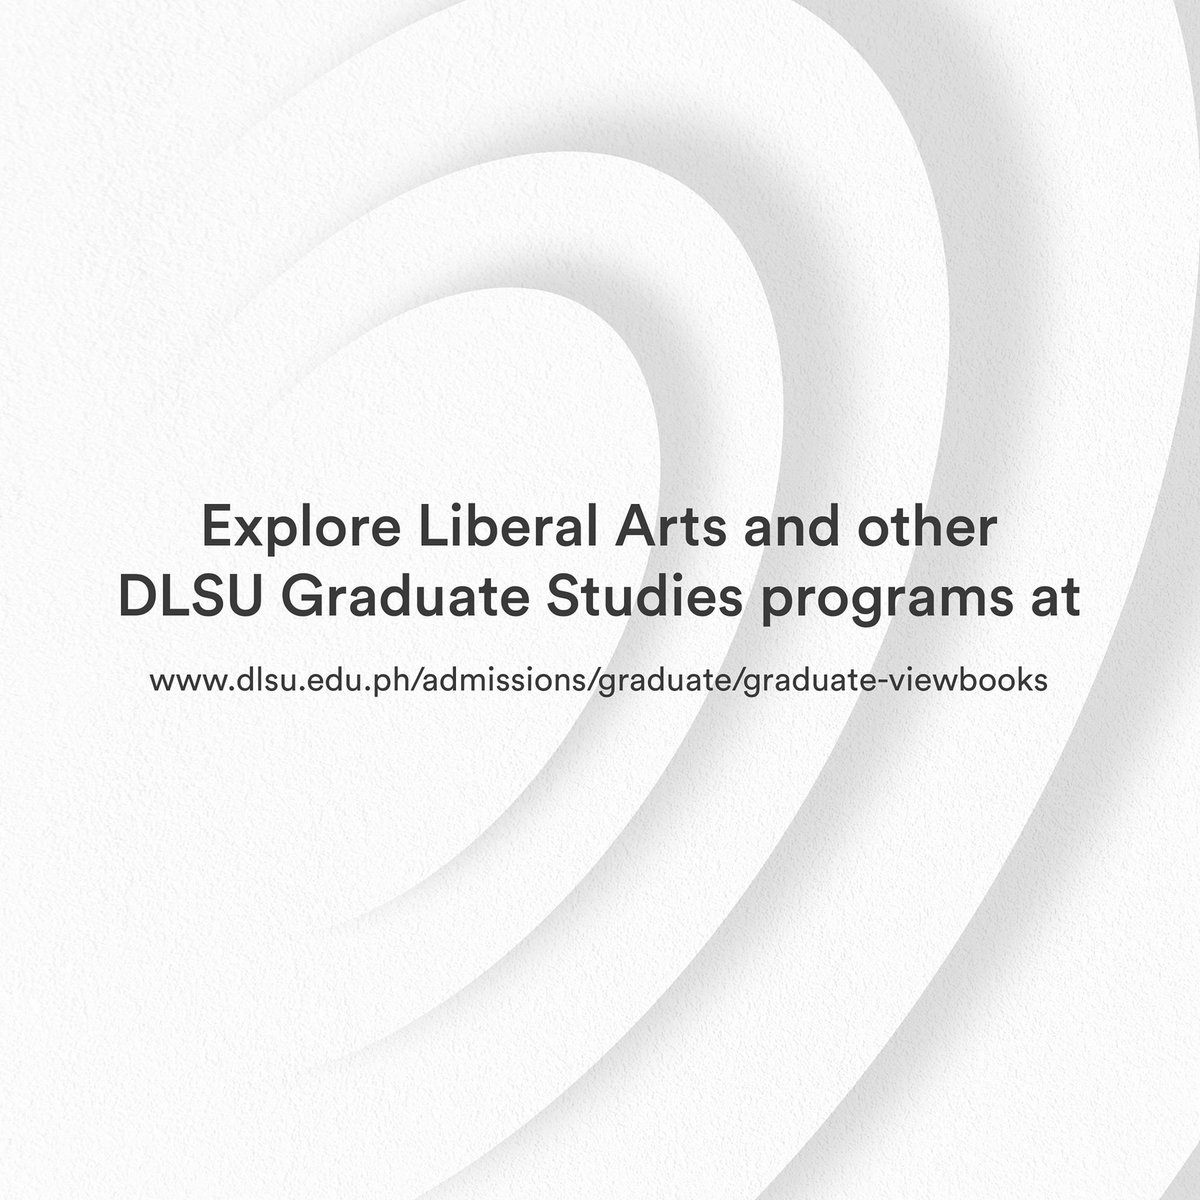 Explore DLSU Graduate Studies programs in Liberal Arts and build a career with impact. Application for Term 2, A.Y. 2023-24 is open until October 14. Apply online @ dlsu.edu.ph/admissions/gra… De La Salle University Graduate Studies Beyond higher learning.®